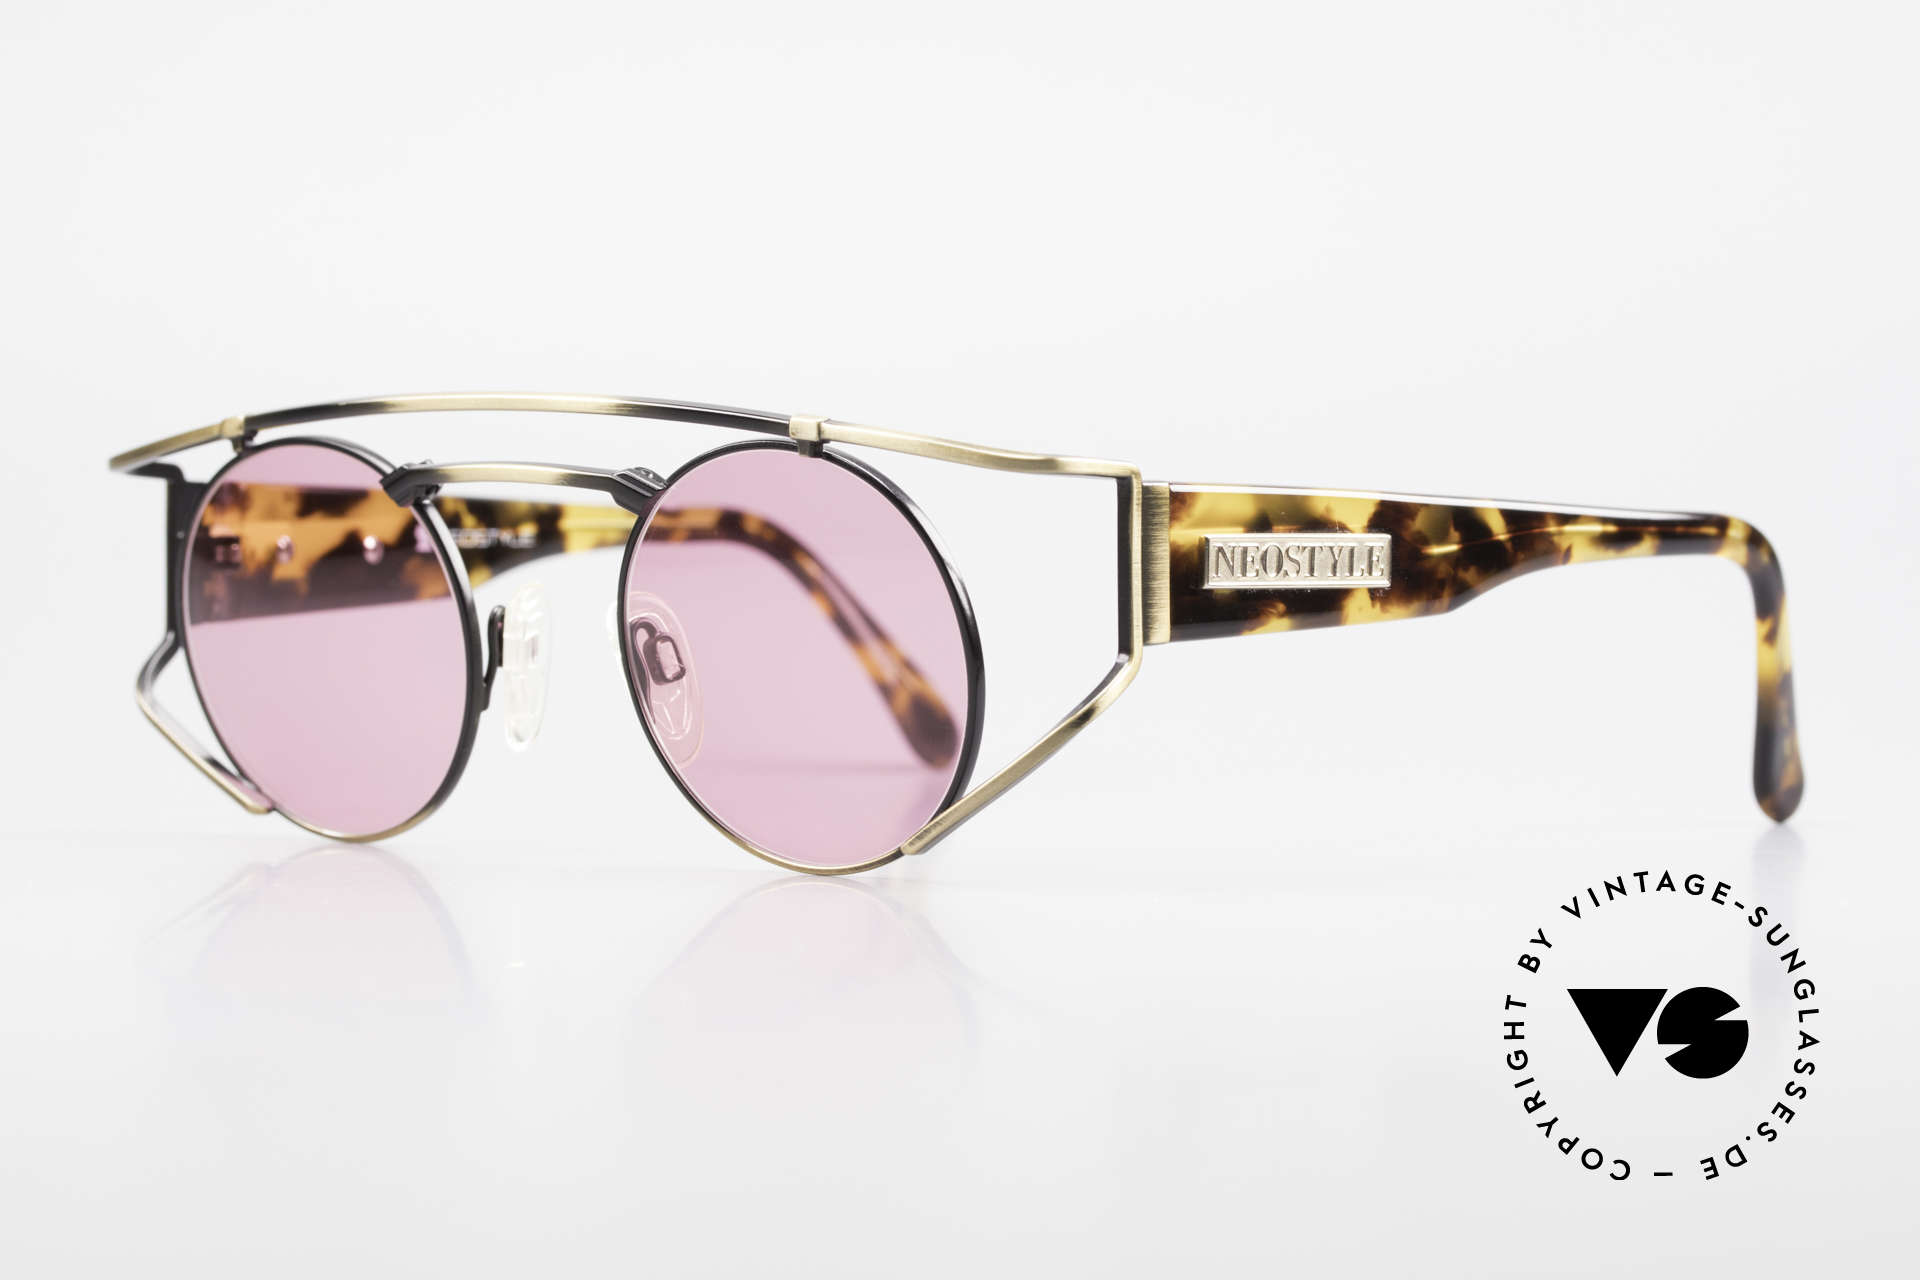 Neostyle Superstar 1 Steampunk Sunglasses Pink, yellow-brownish coloring in a kind of camouflage, Made for Men and Women